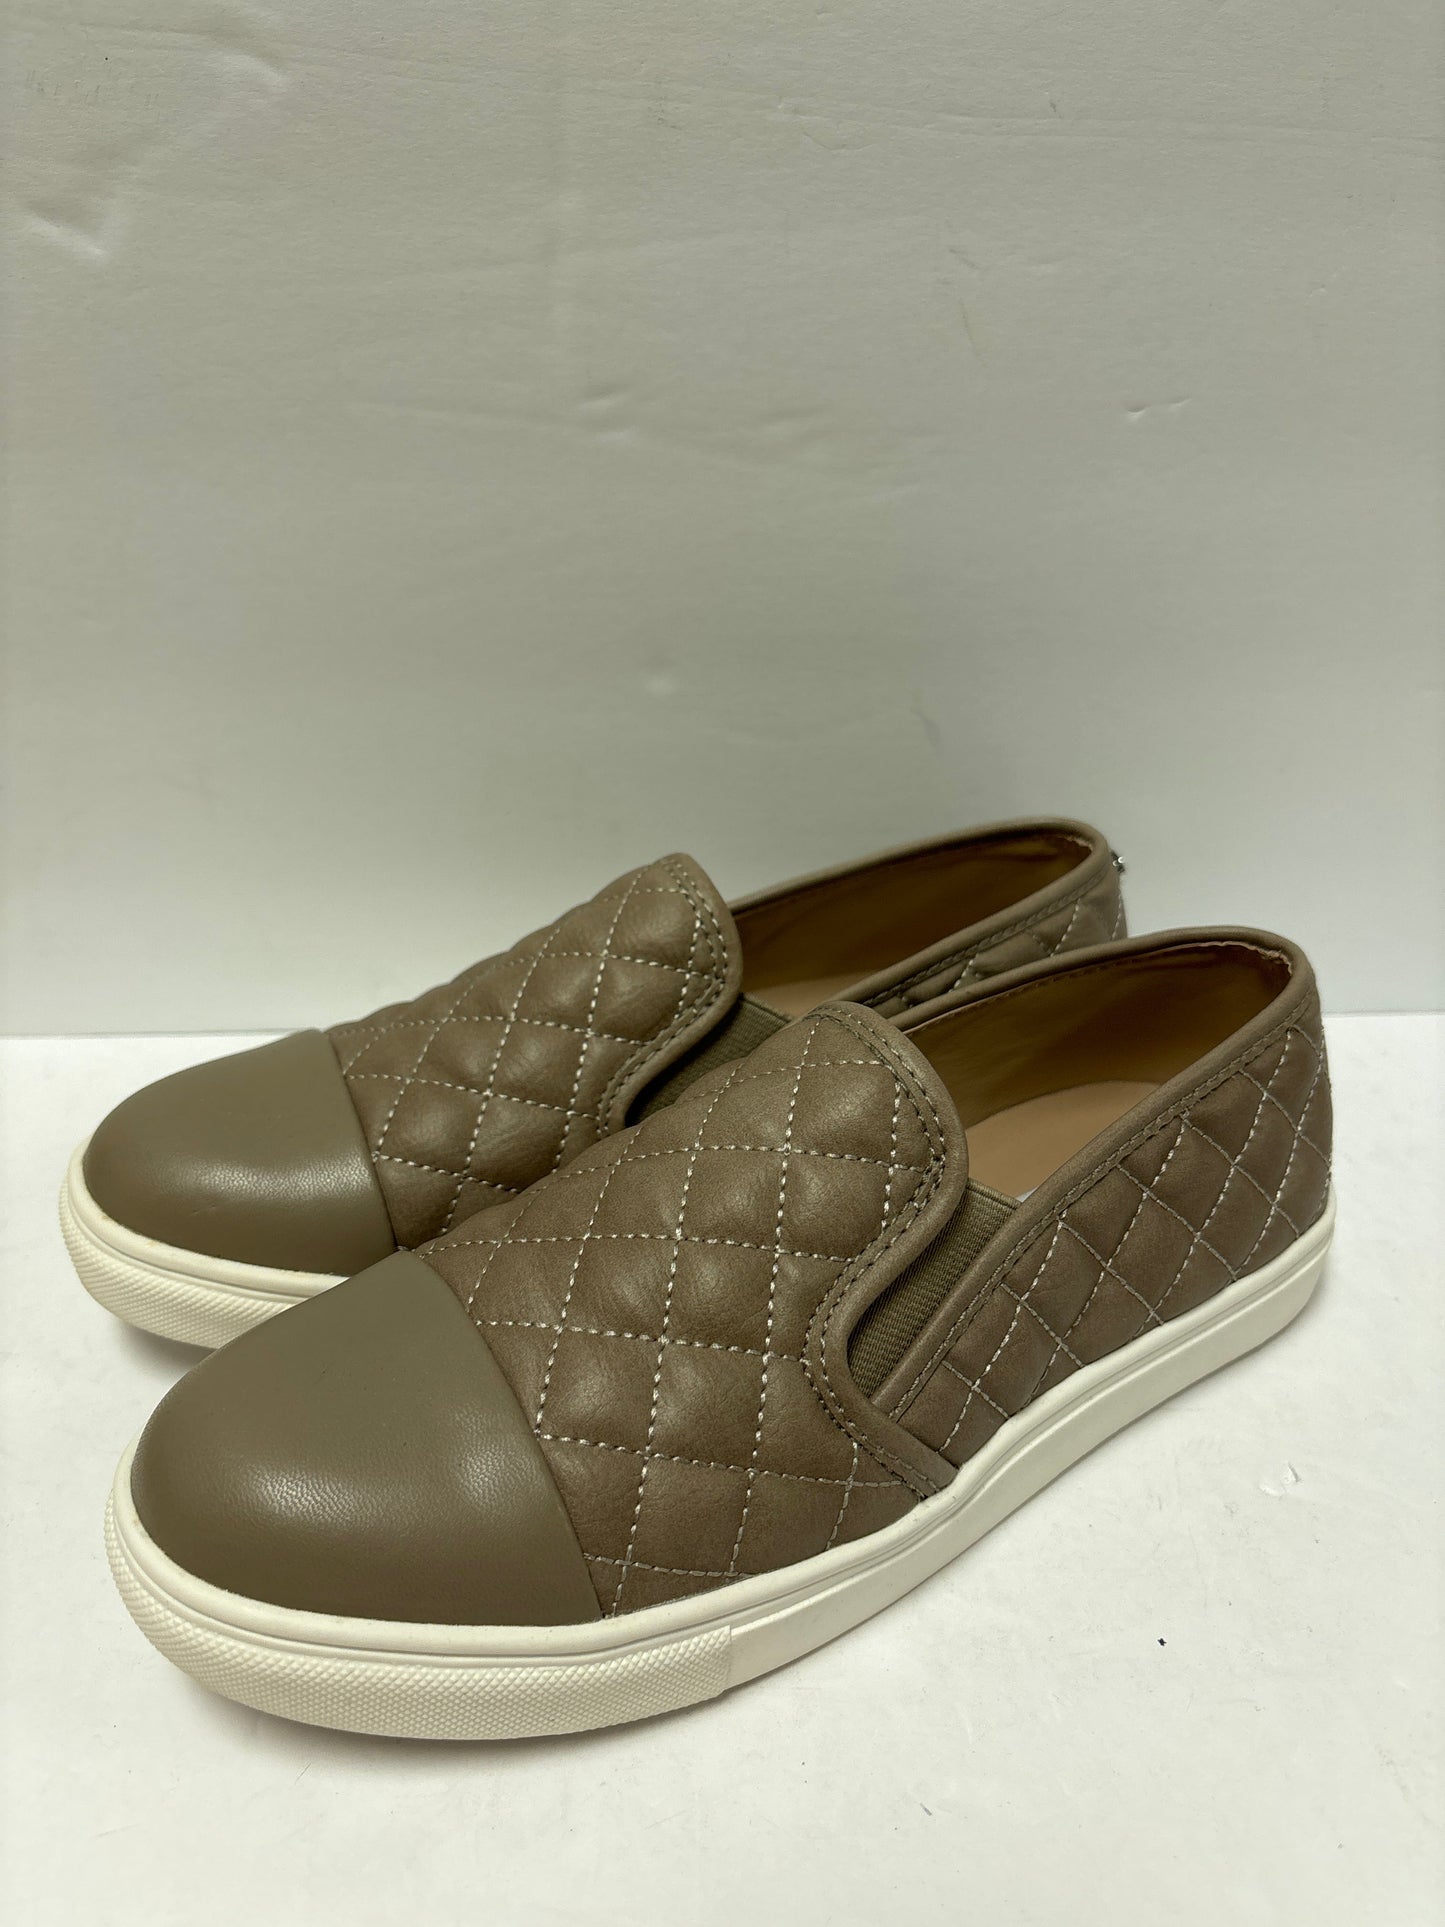 Taupe Shoes Flats Steve Madden, Size 7